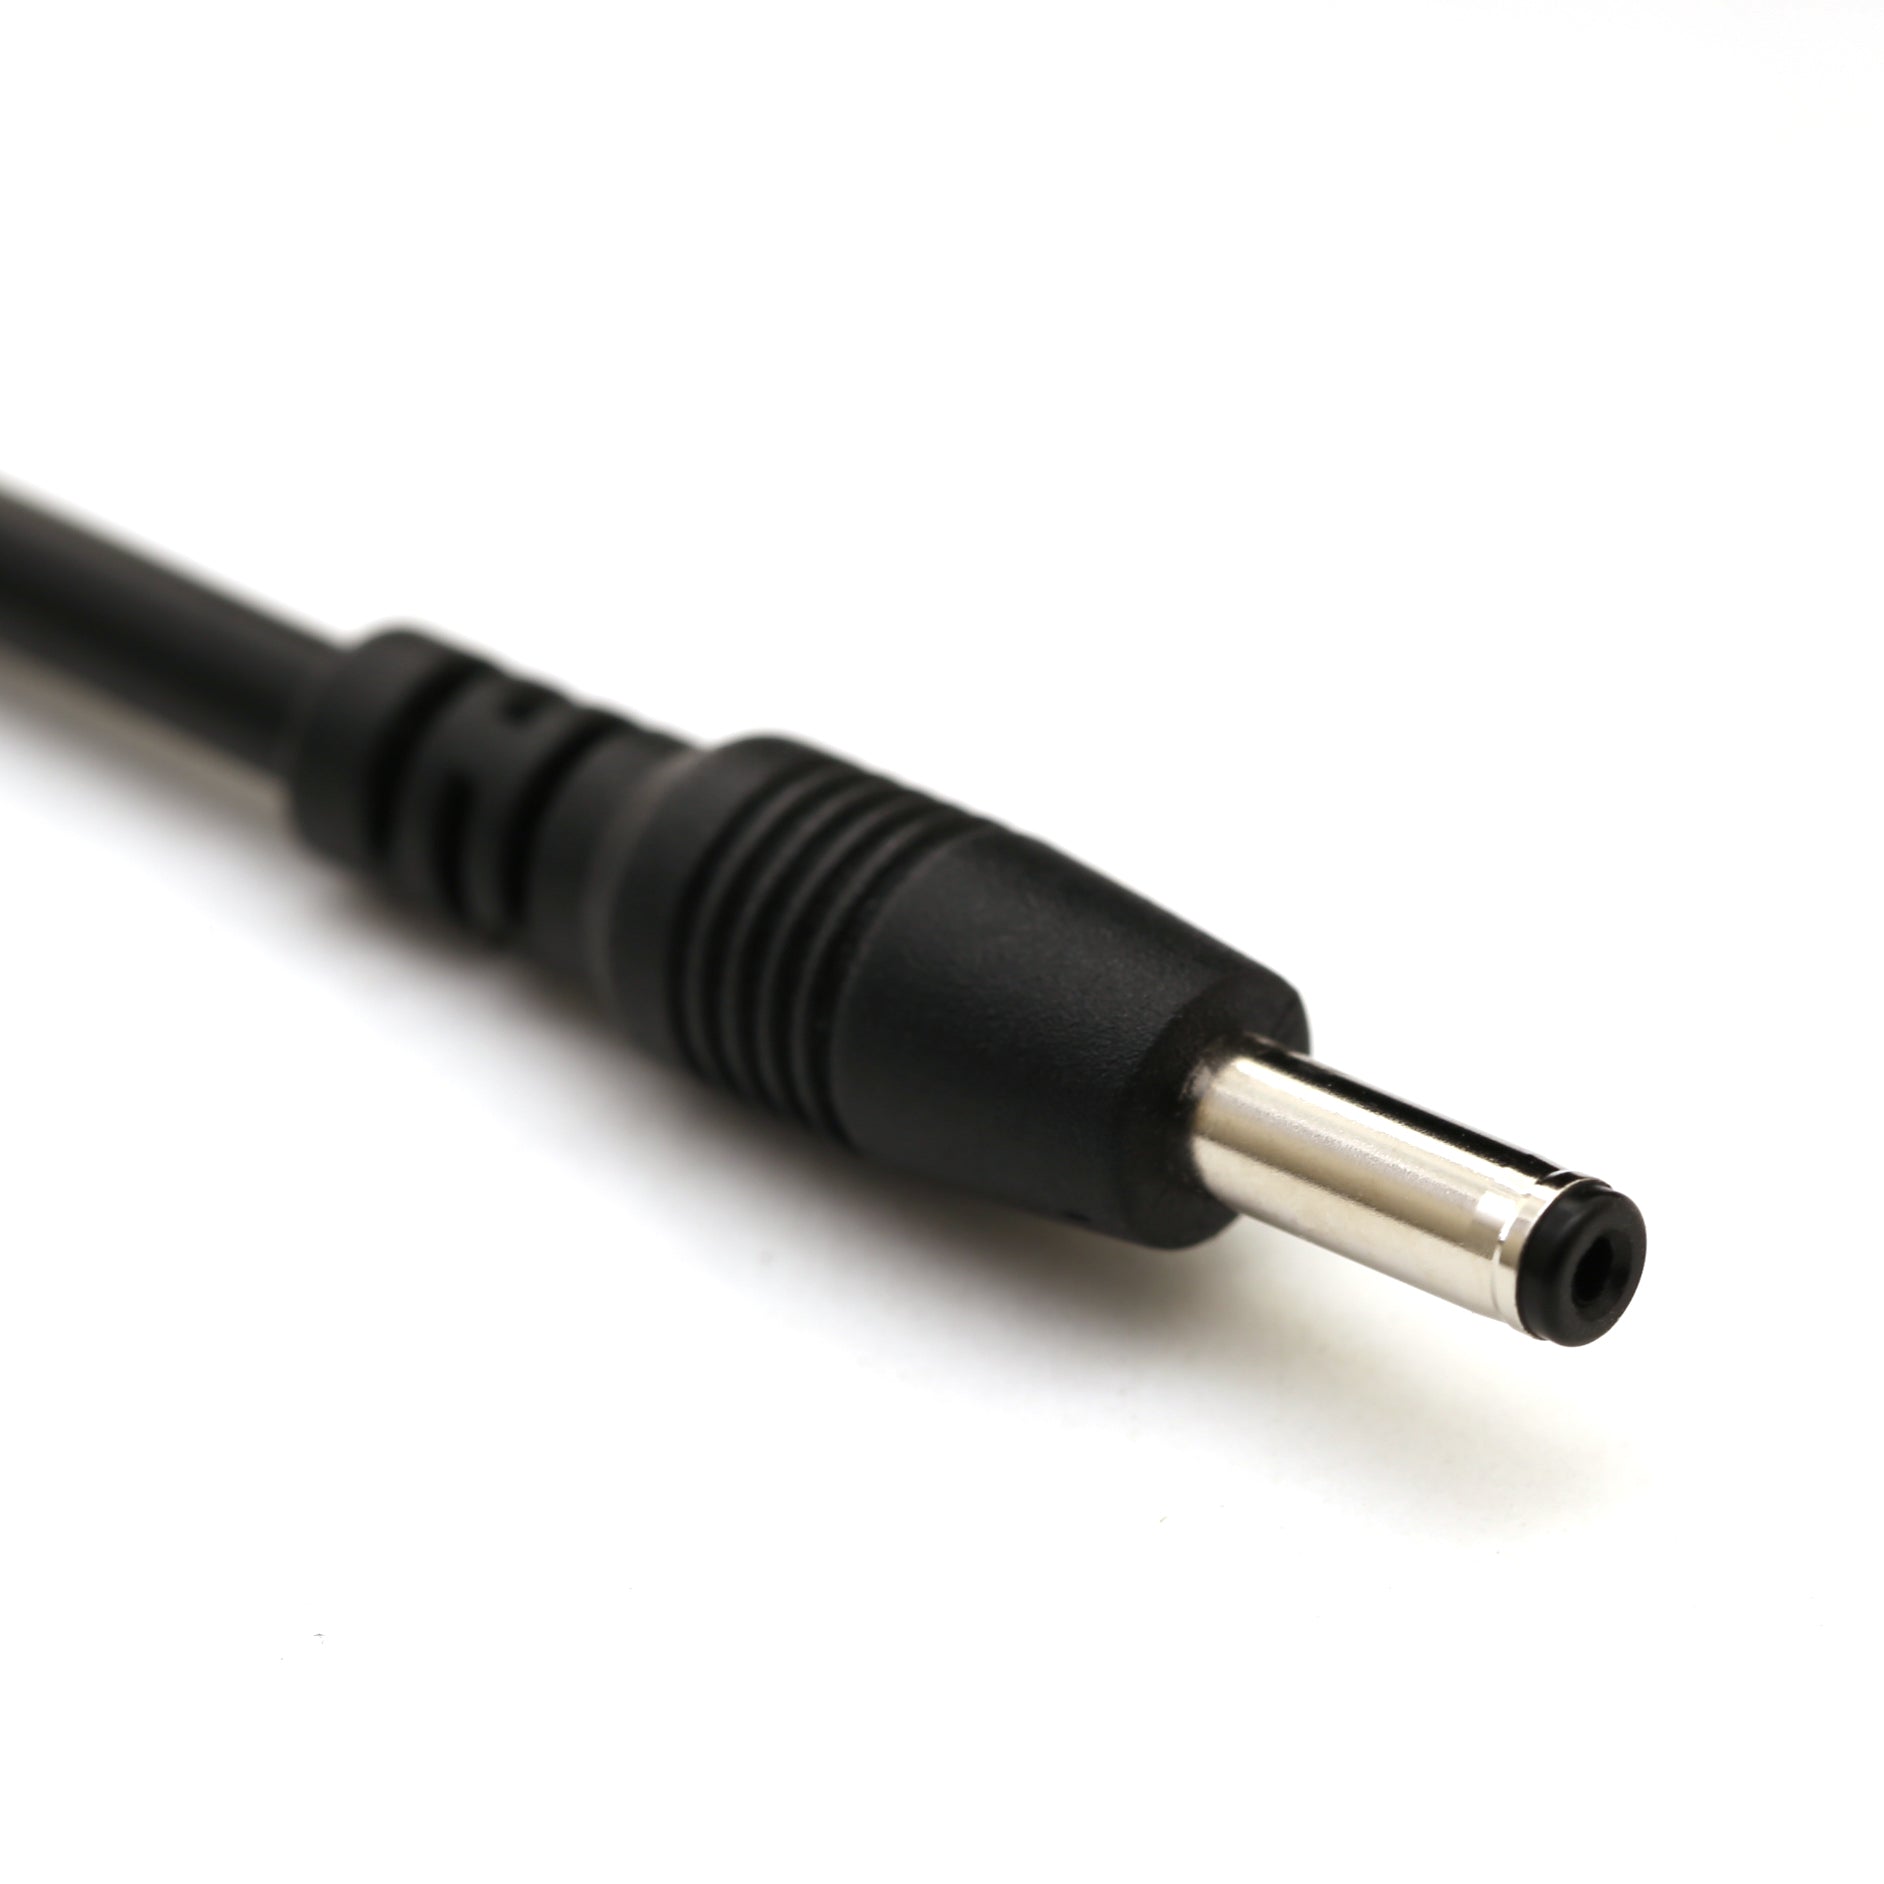 12ft In-Wall Rated Interconnect Cable for Modular LED Under Cabinet Lighting (Black)